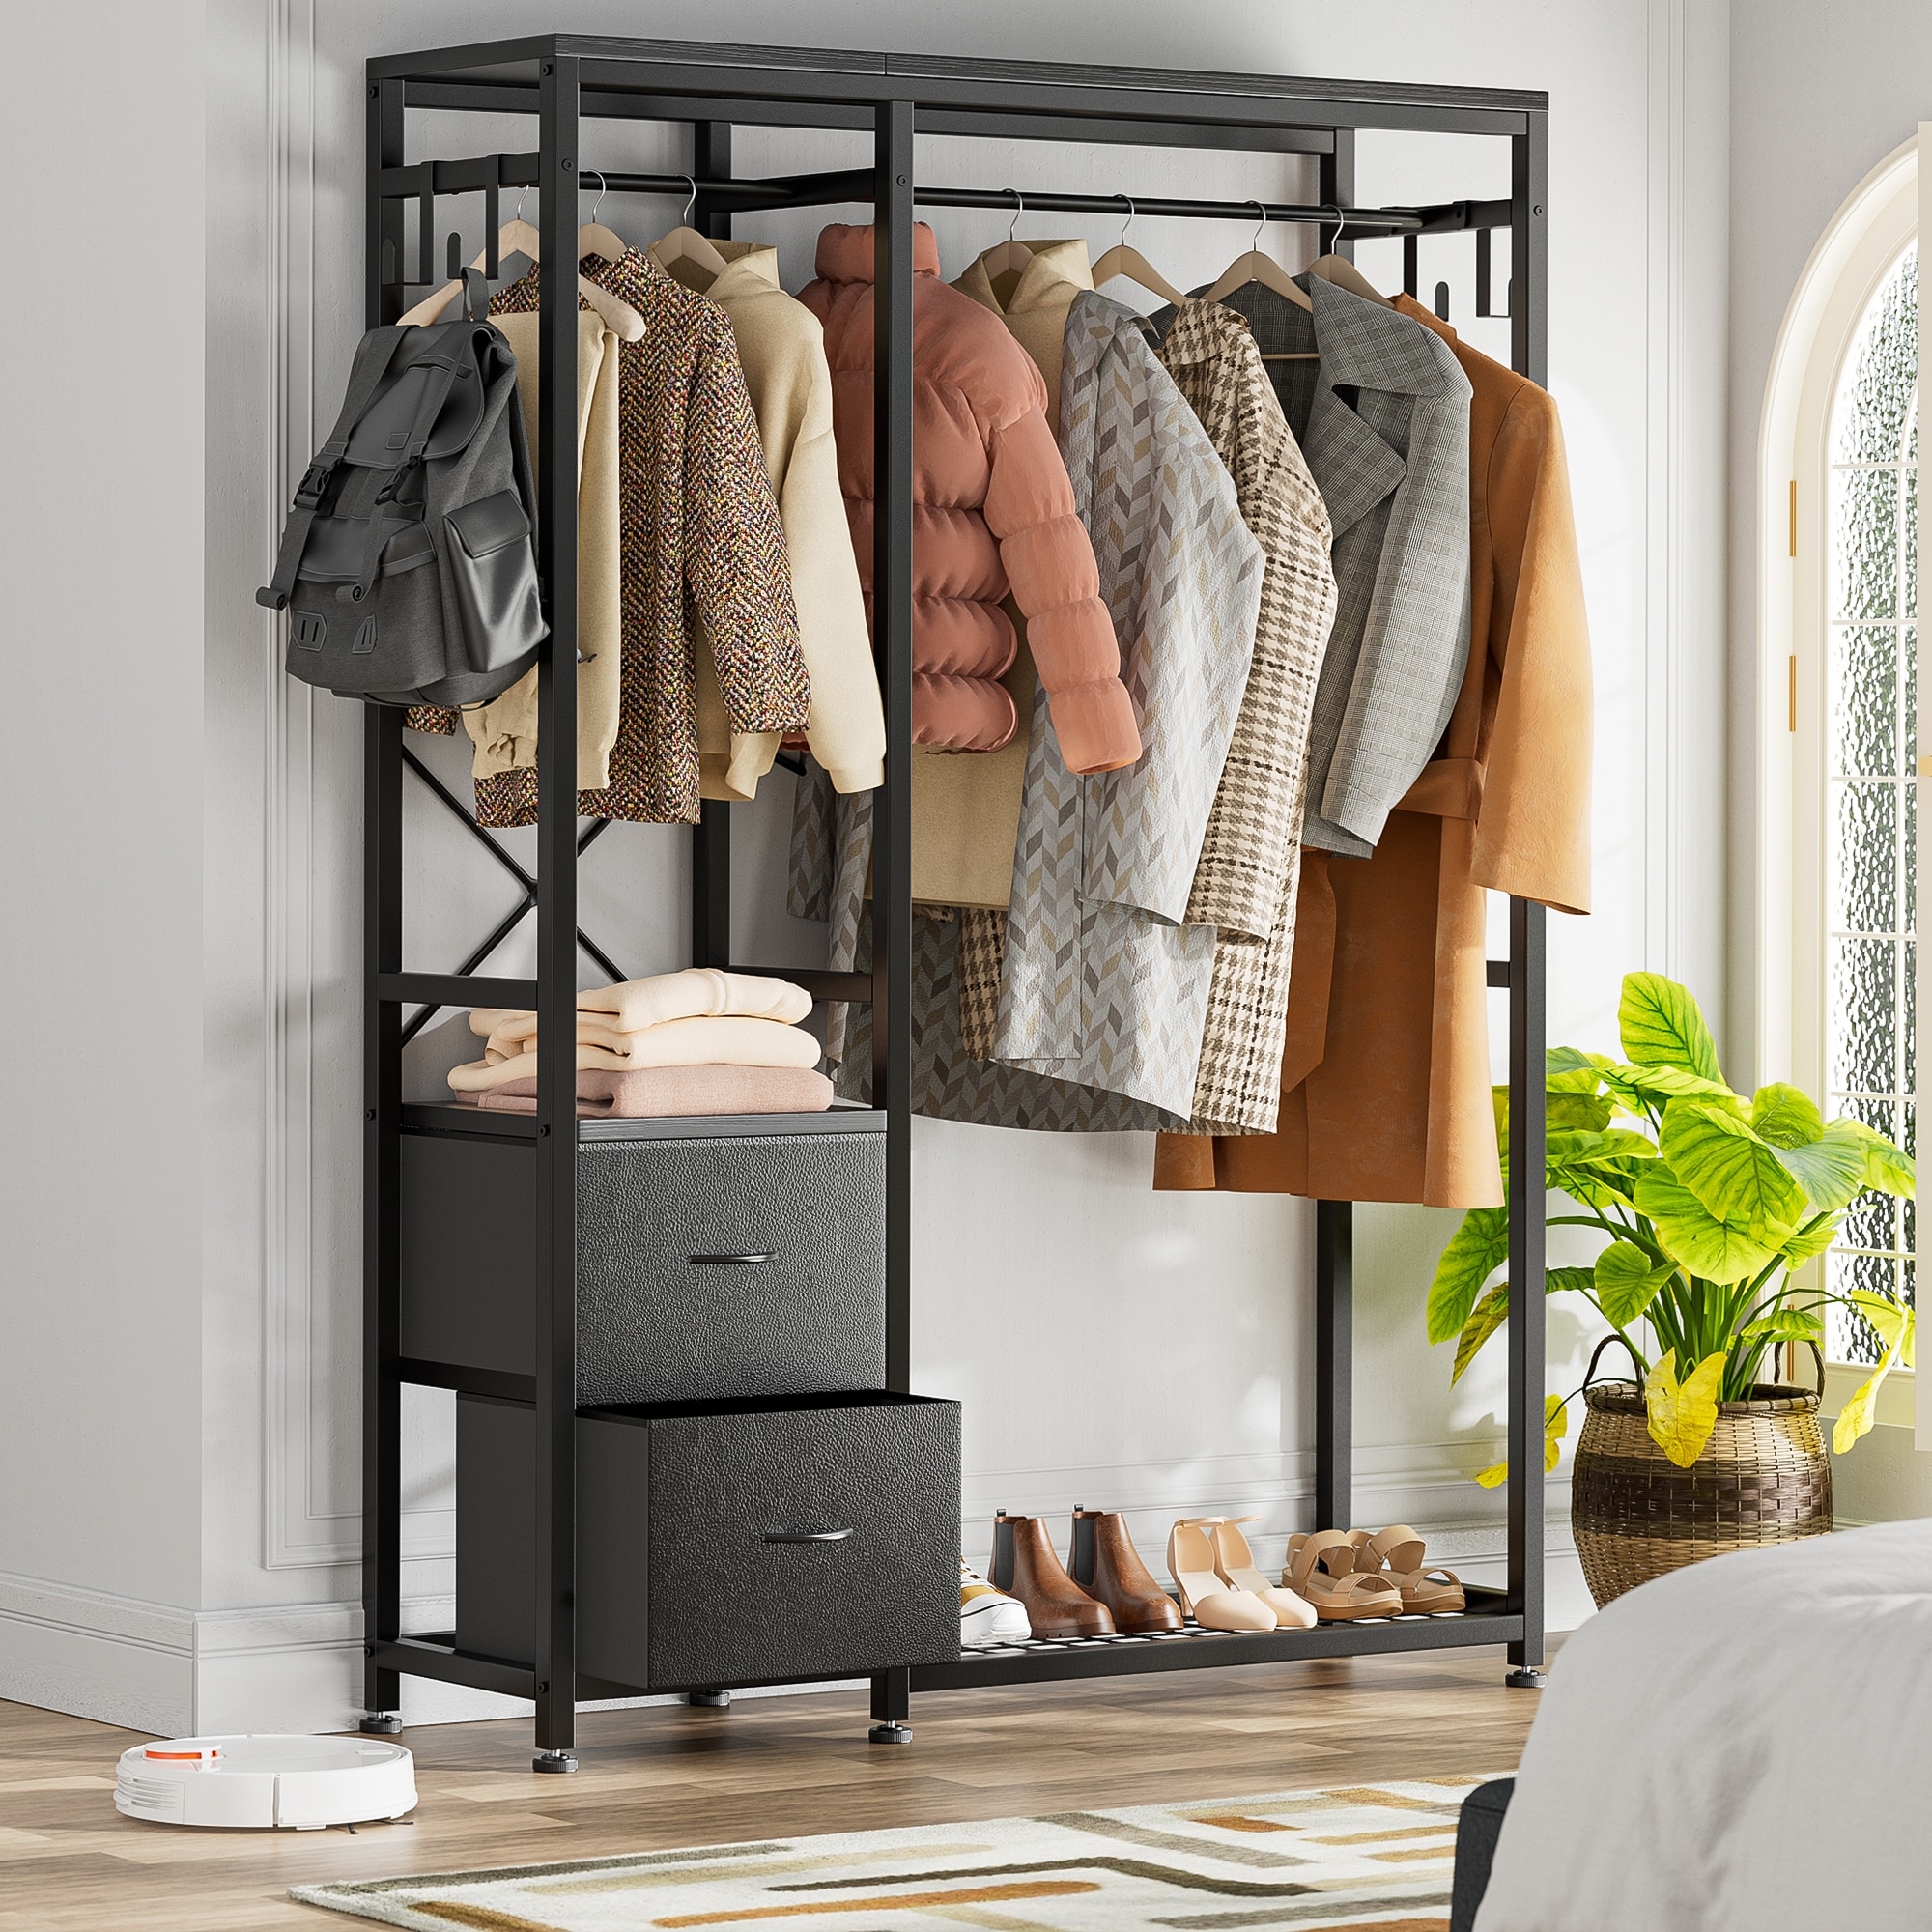 https://ak1.ostkcdn.com/images/products/is/images/direct/5a335ed9164a07039c5a3a314c5478a83ef59365/Clothes-Rack%2C-Closet-Organizer-with-Storage-Shelves%2C-Hanging-Bar%2C-Drawers.jpg